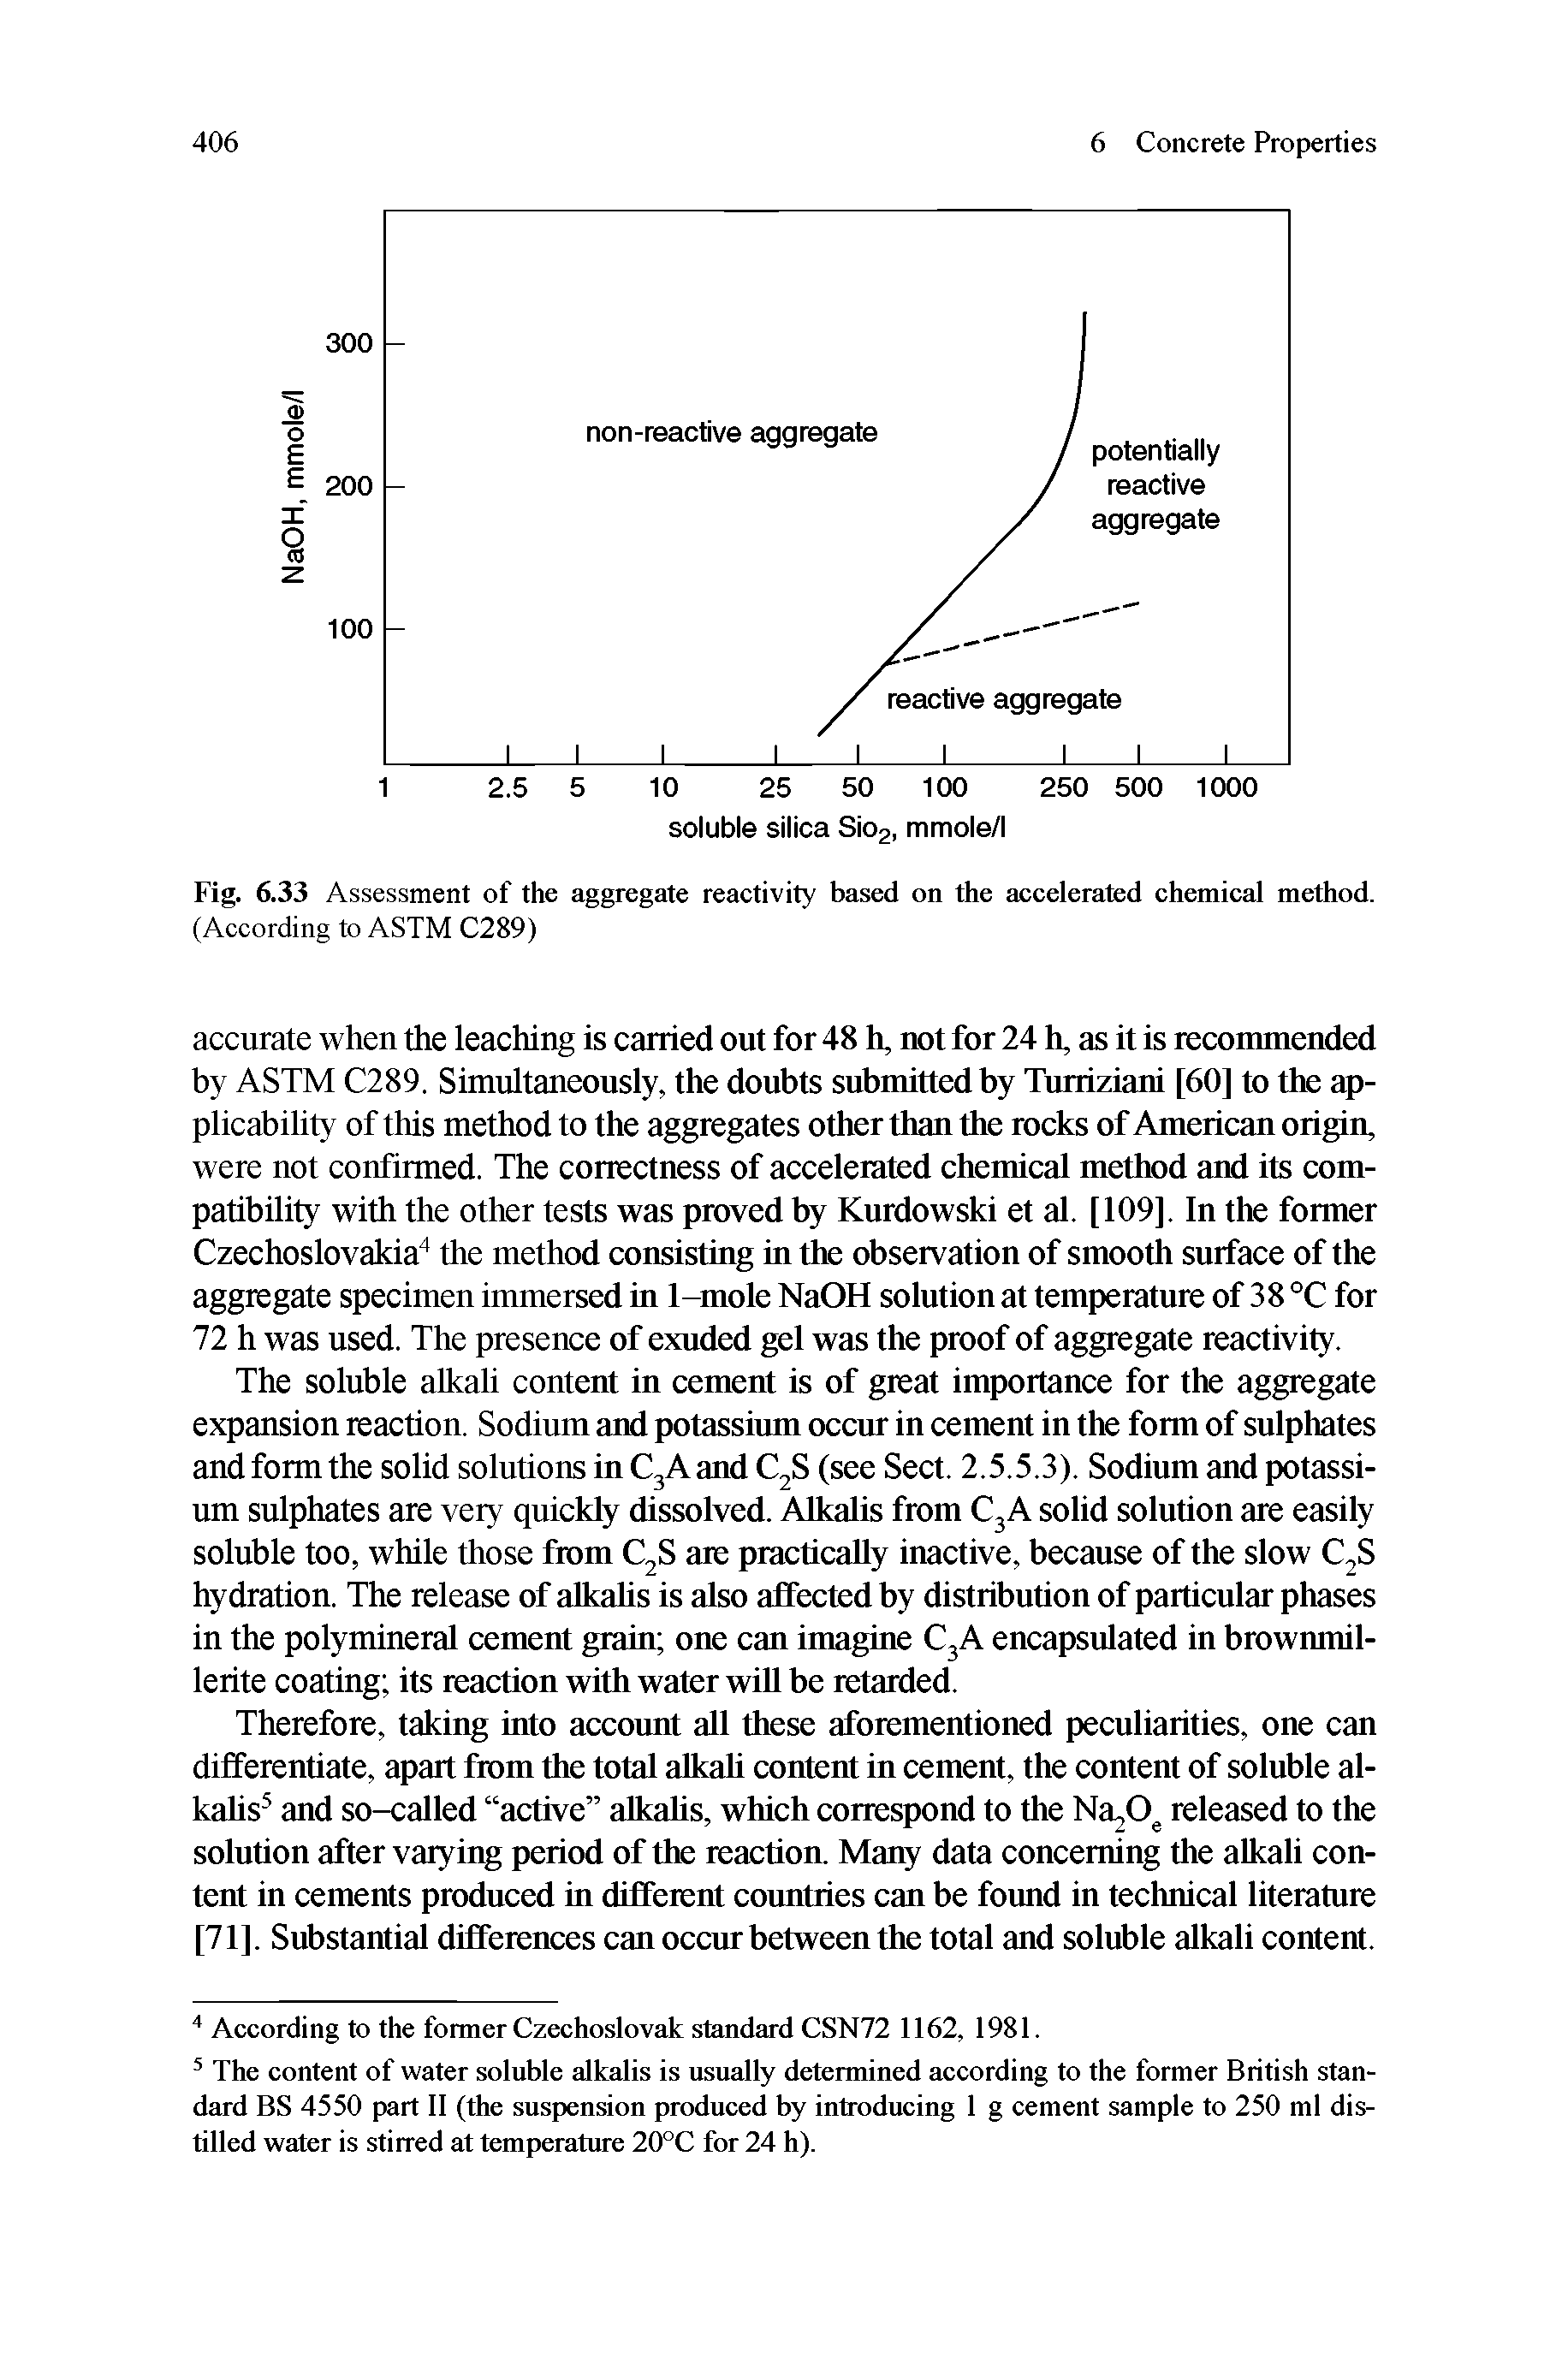 Fig. 6.33 Assessment of the aggregate reactivity based on the accelerated chemical method.